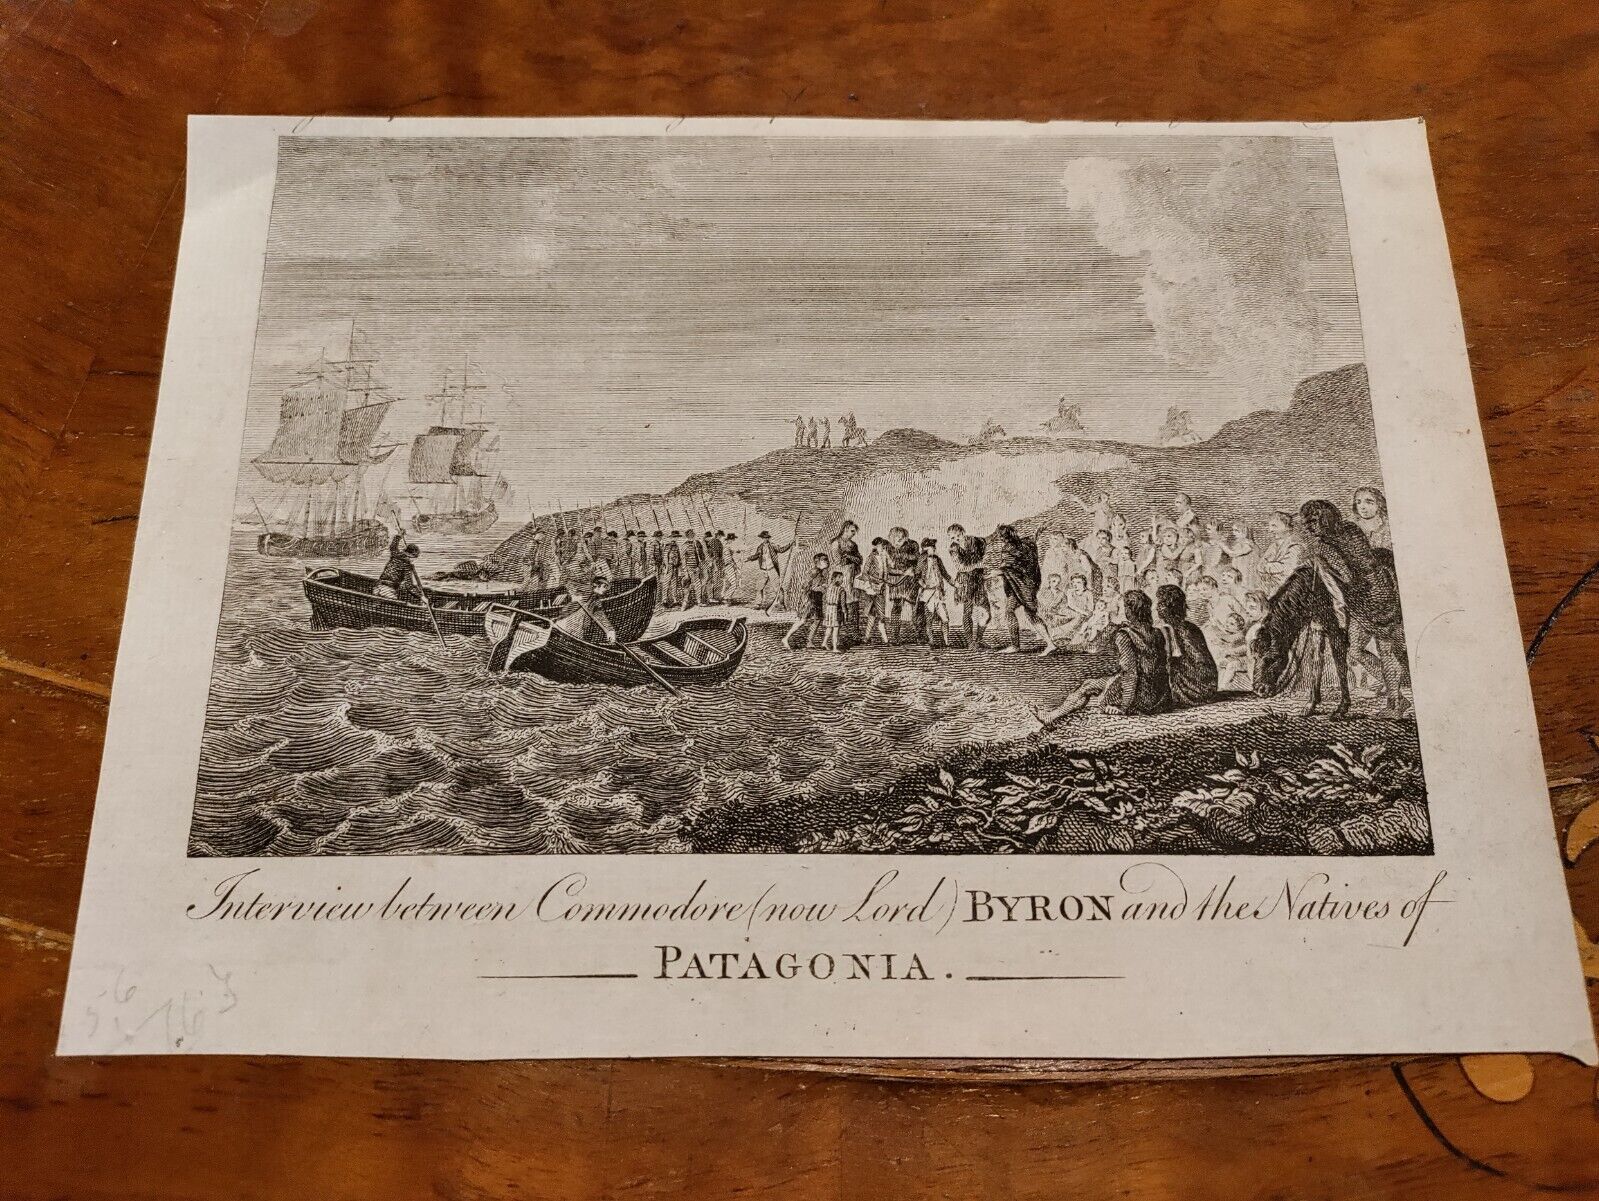 1787 Interview between Commodore (now Lord) Byron & Natives of Patagonia Plate